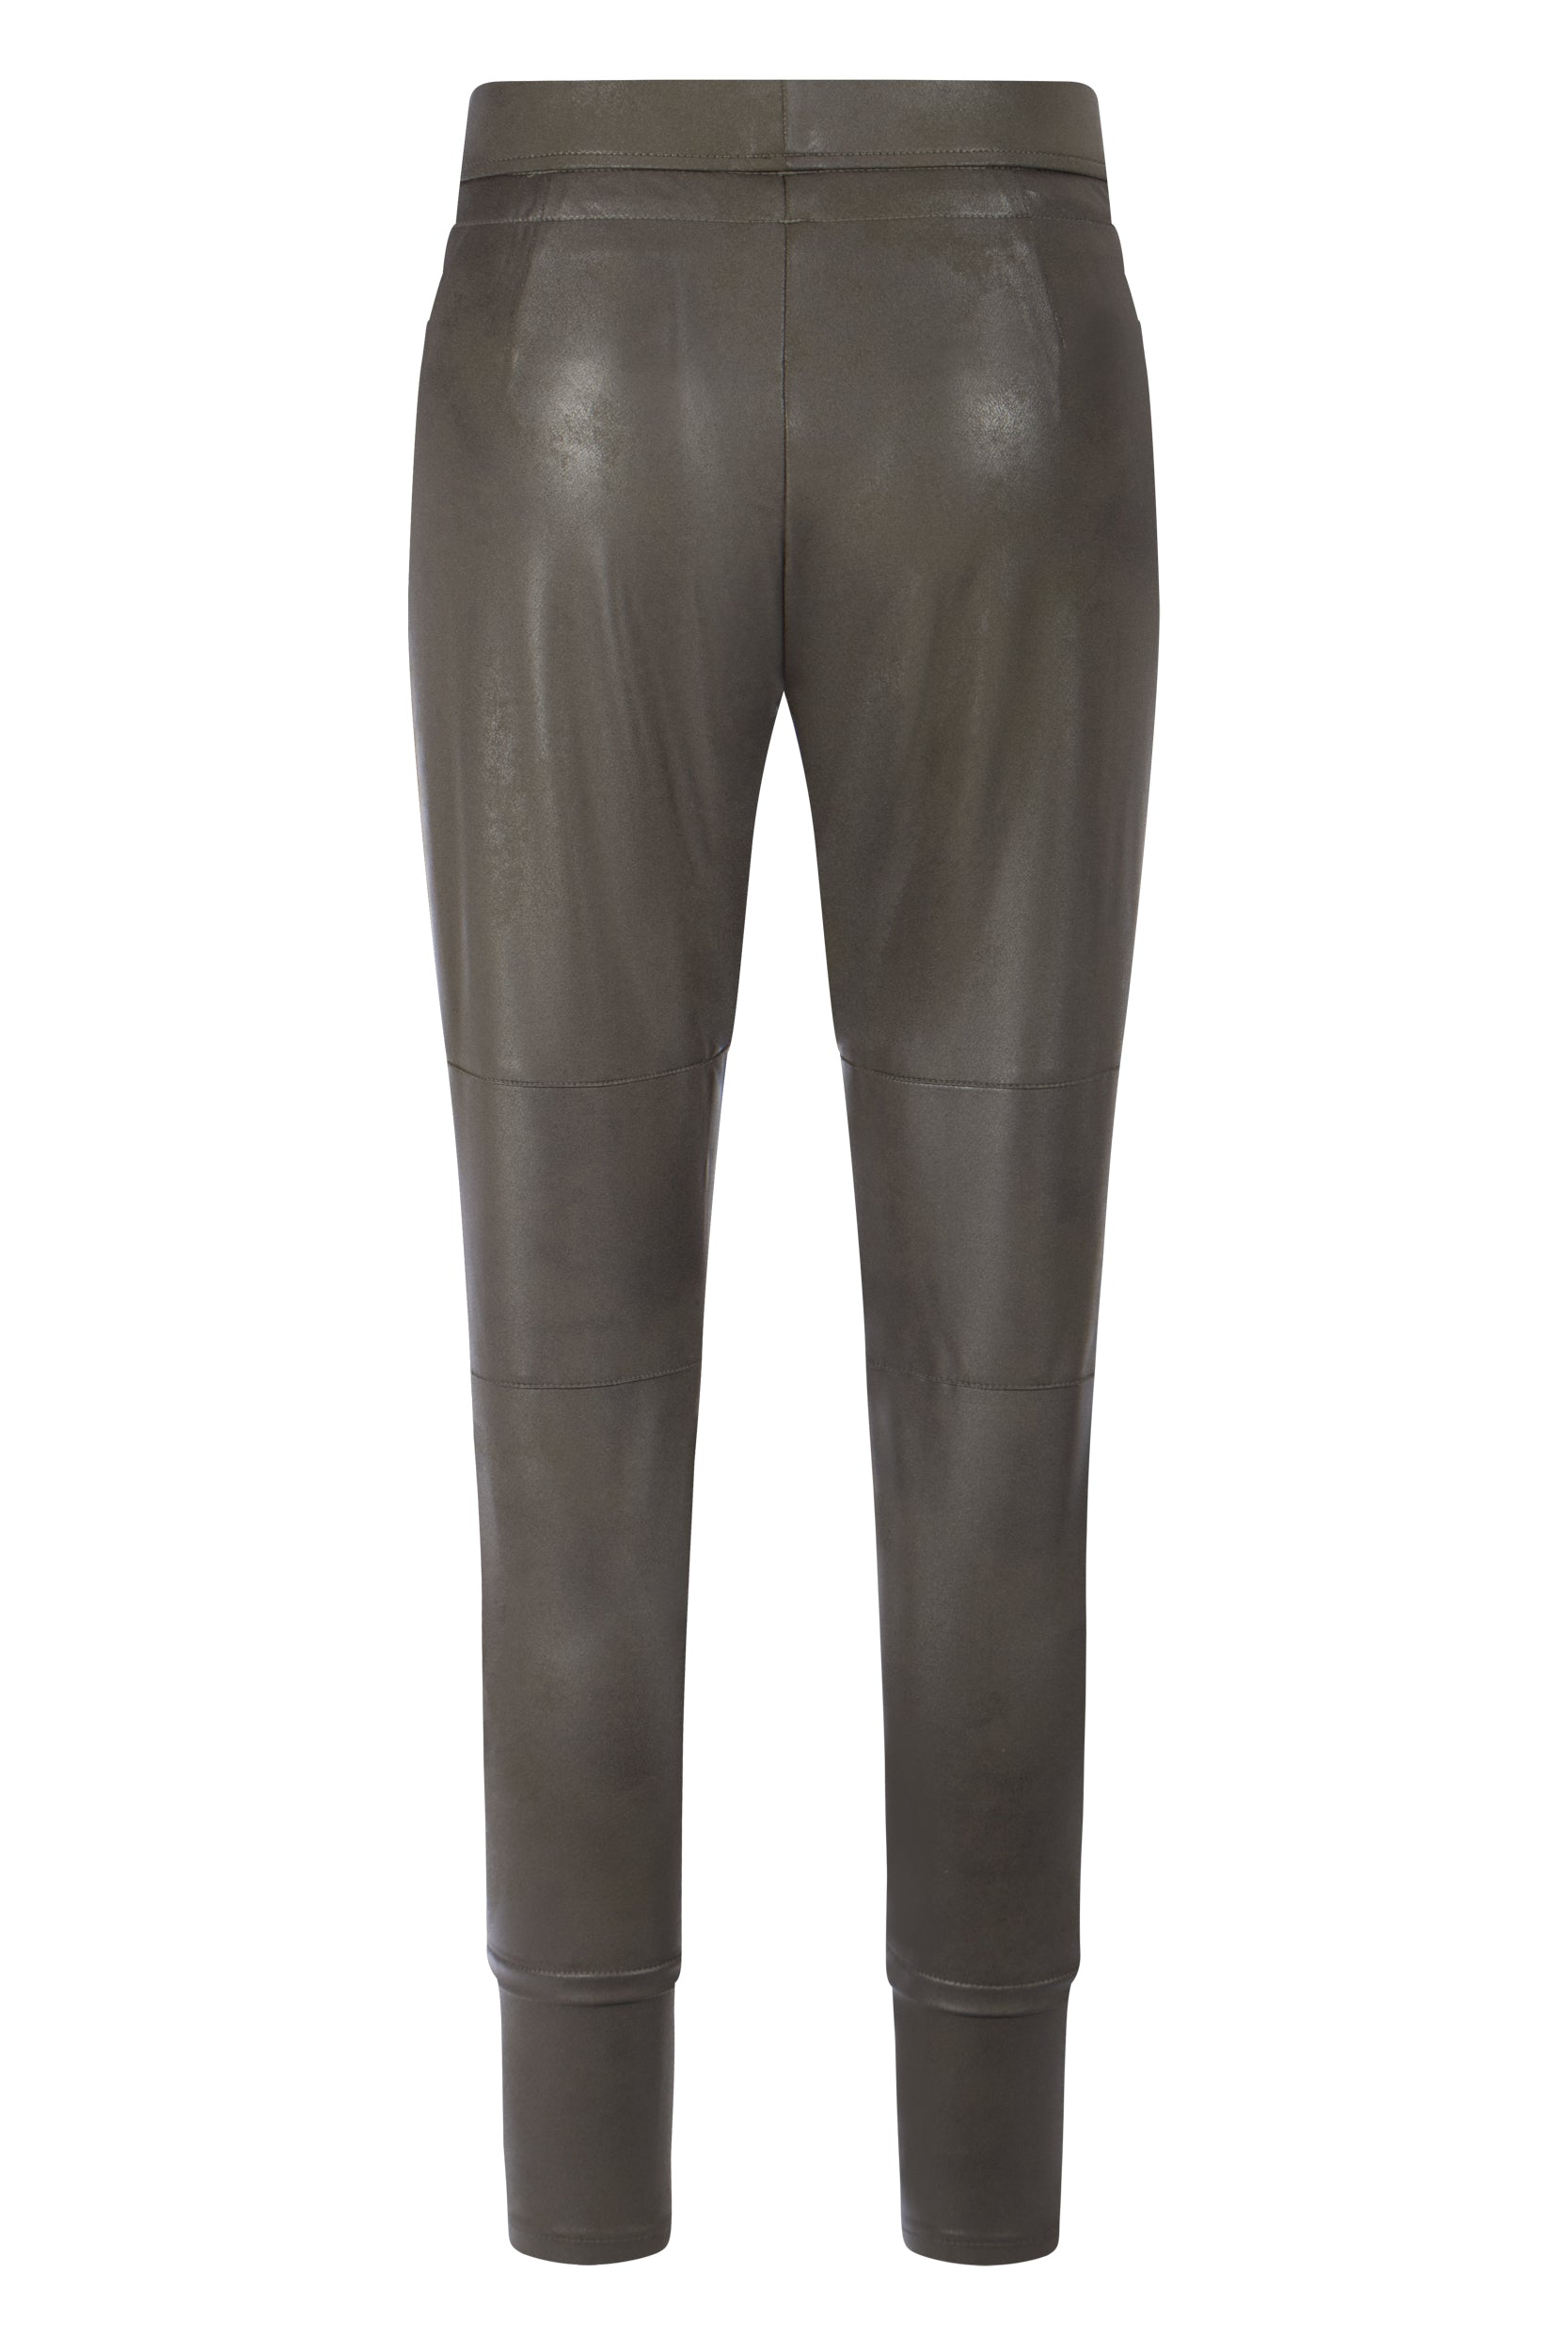 RAFFAELLO ROSSI Candy Leather Look Jersey Pant, Dark Olive – Amelie ...